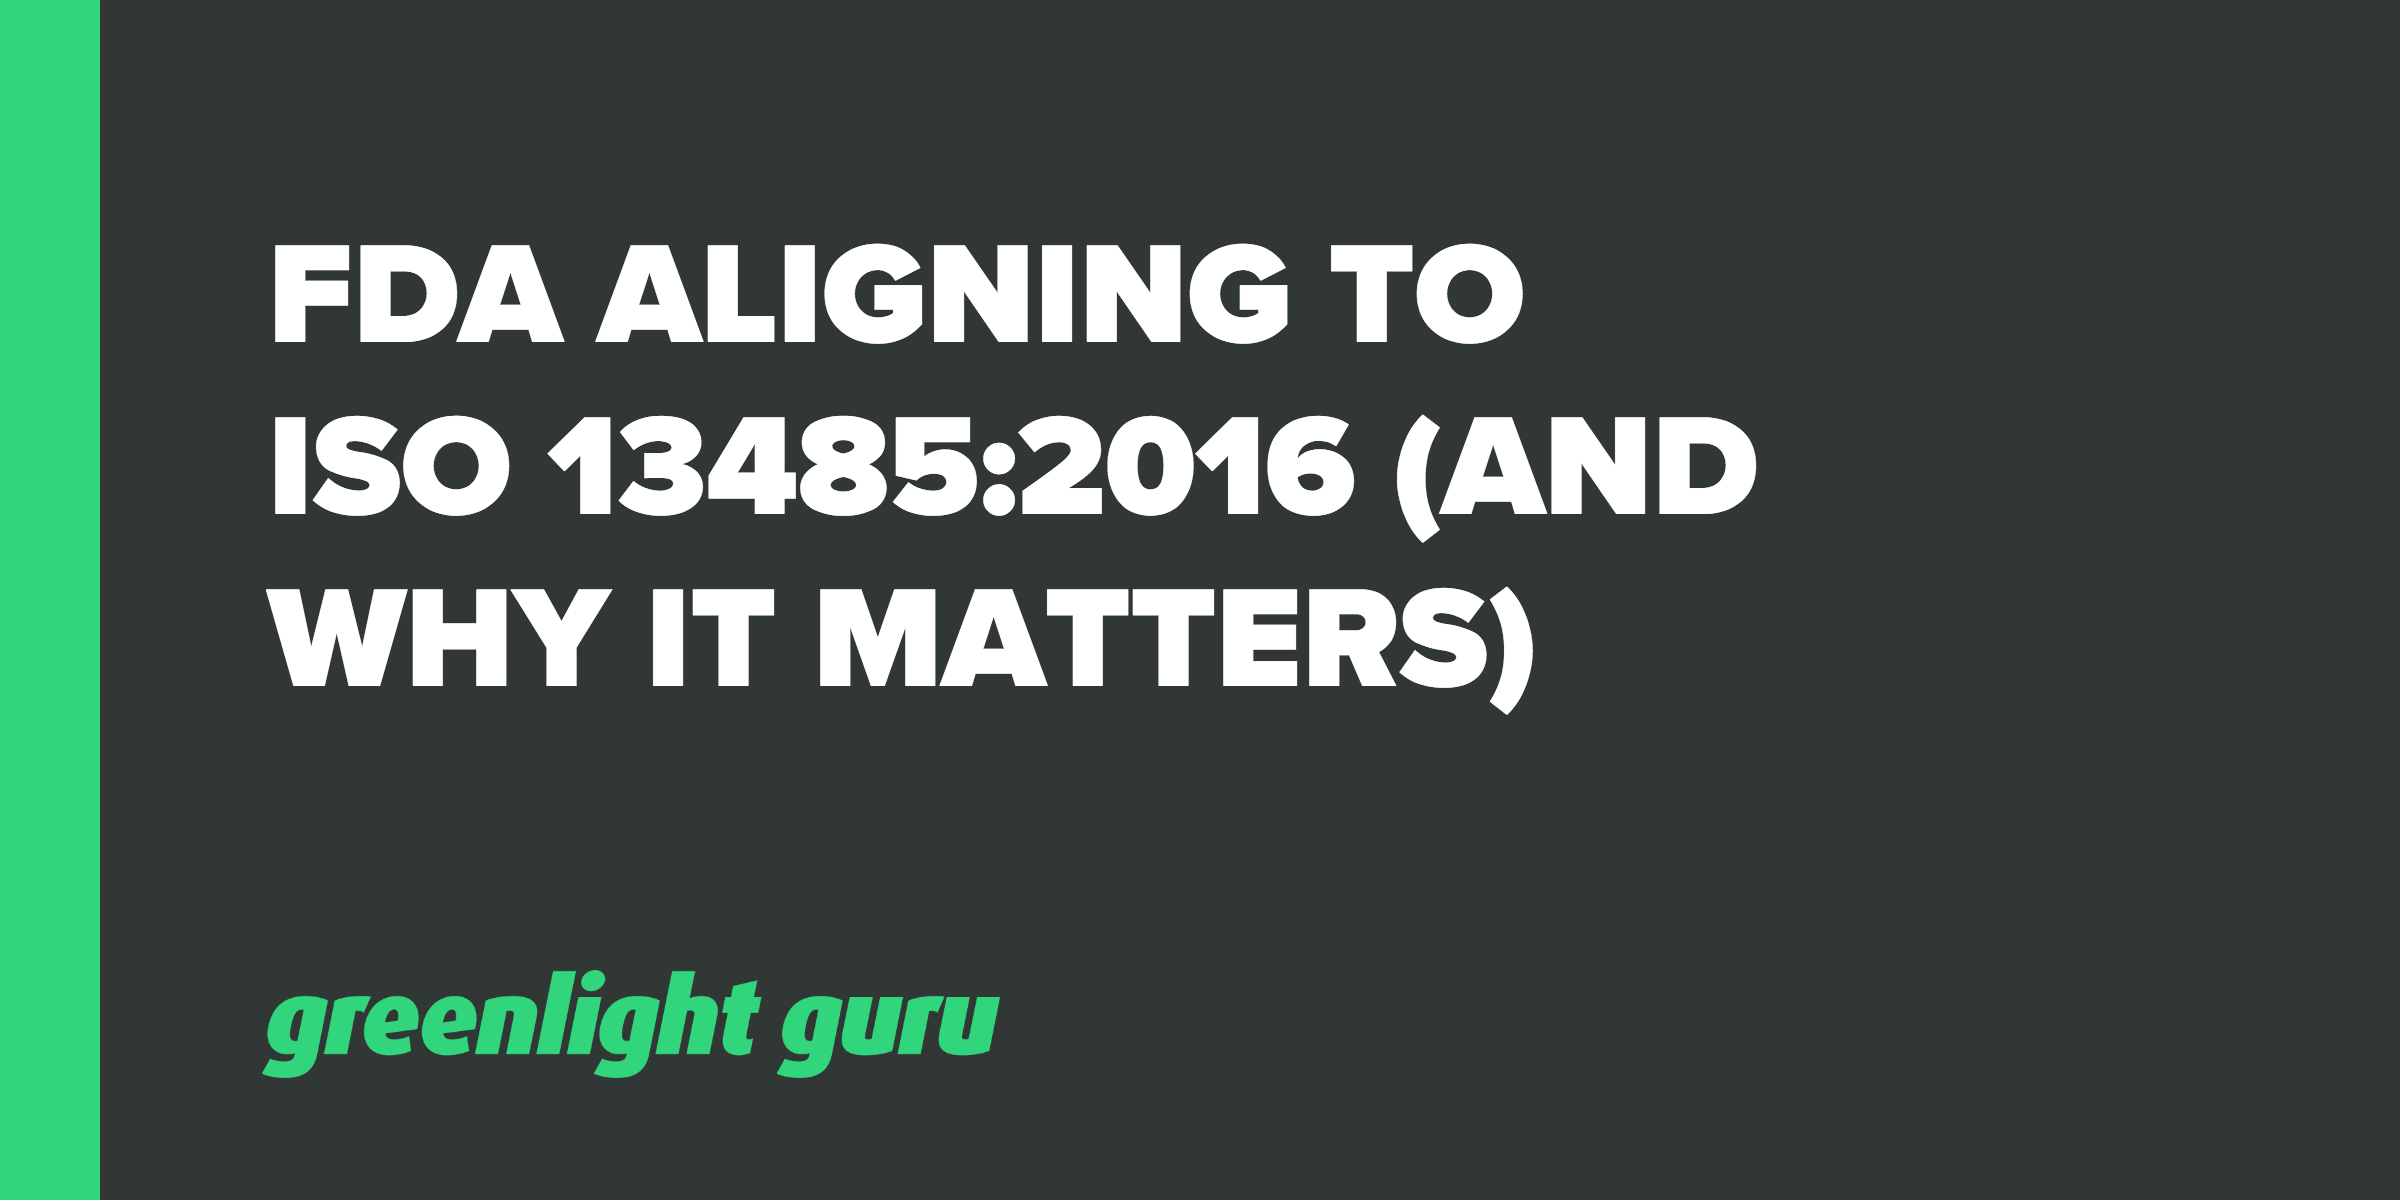 FDA Aligning To ISO 13485_2016 (And Why It Matters)